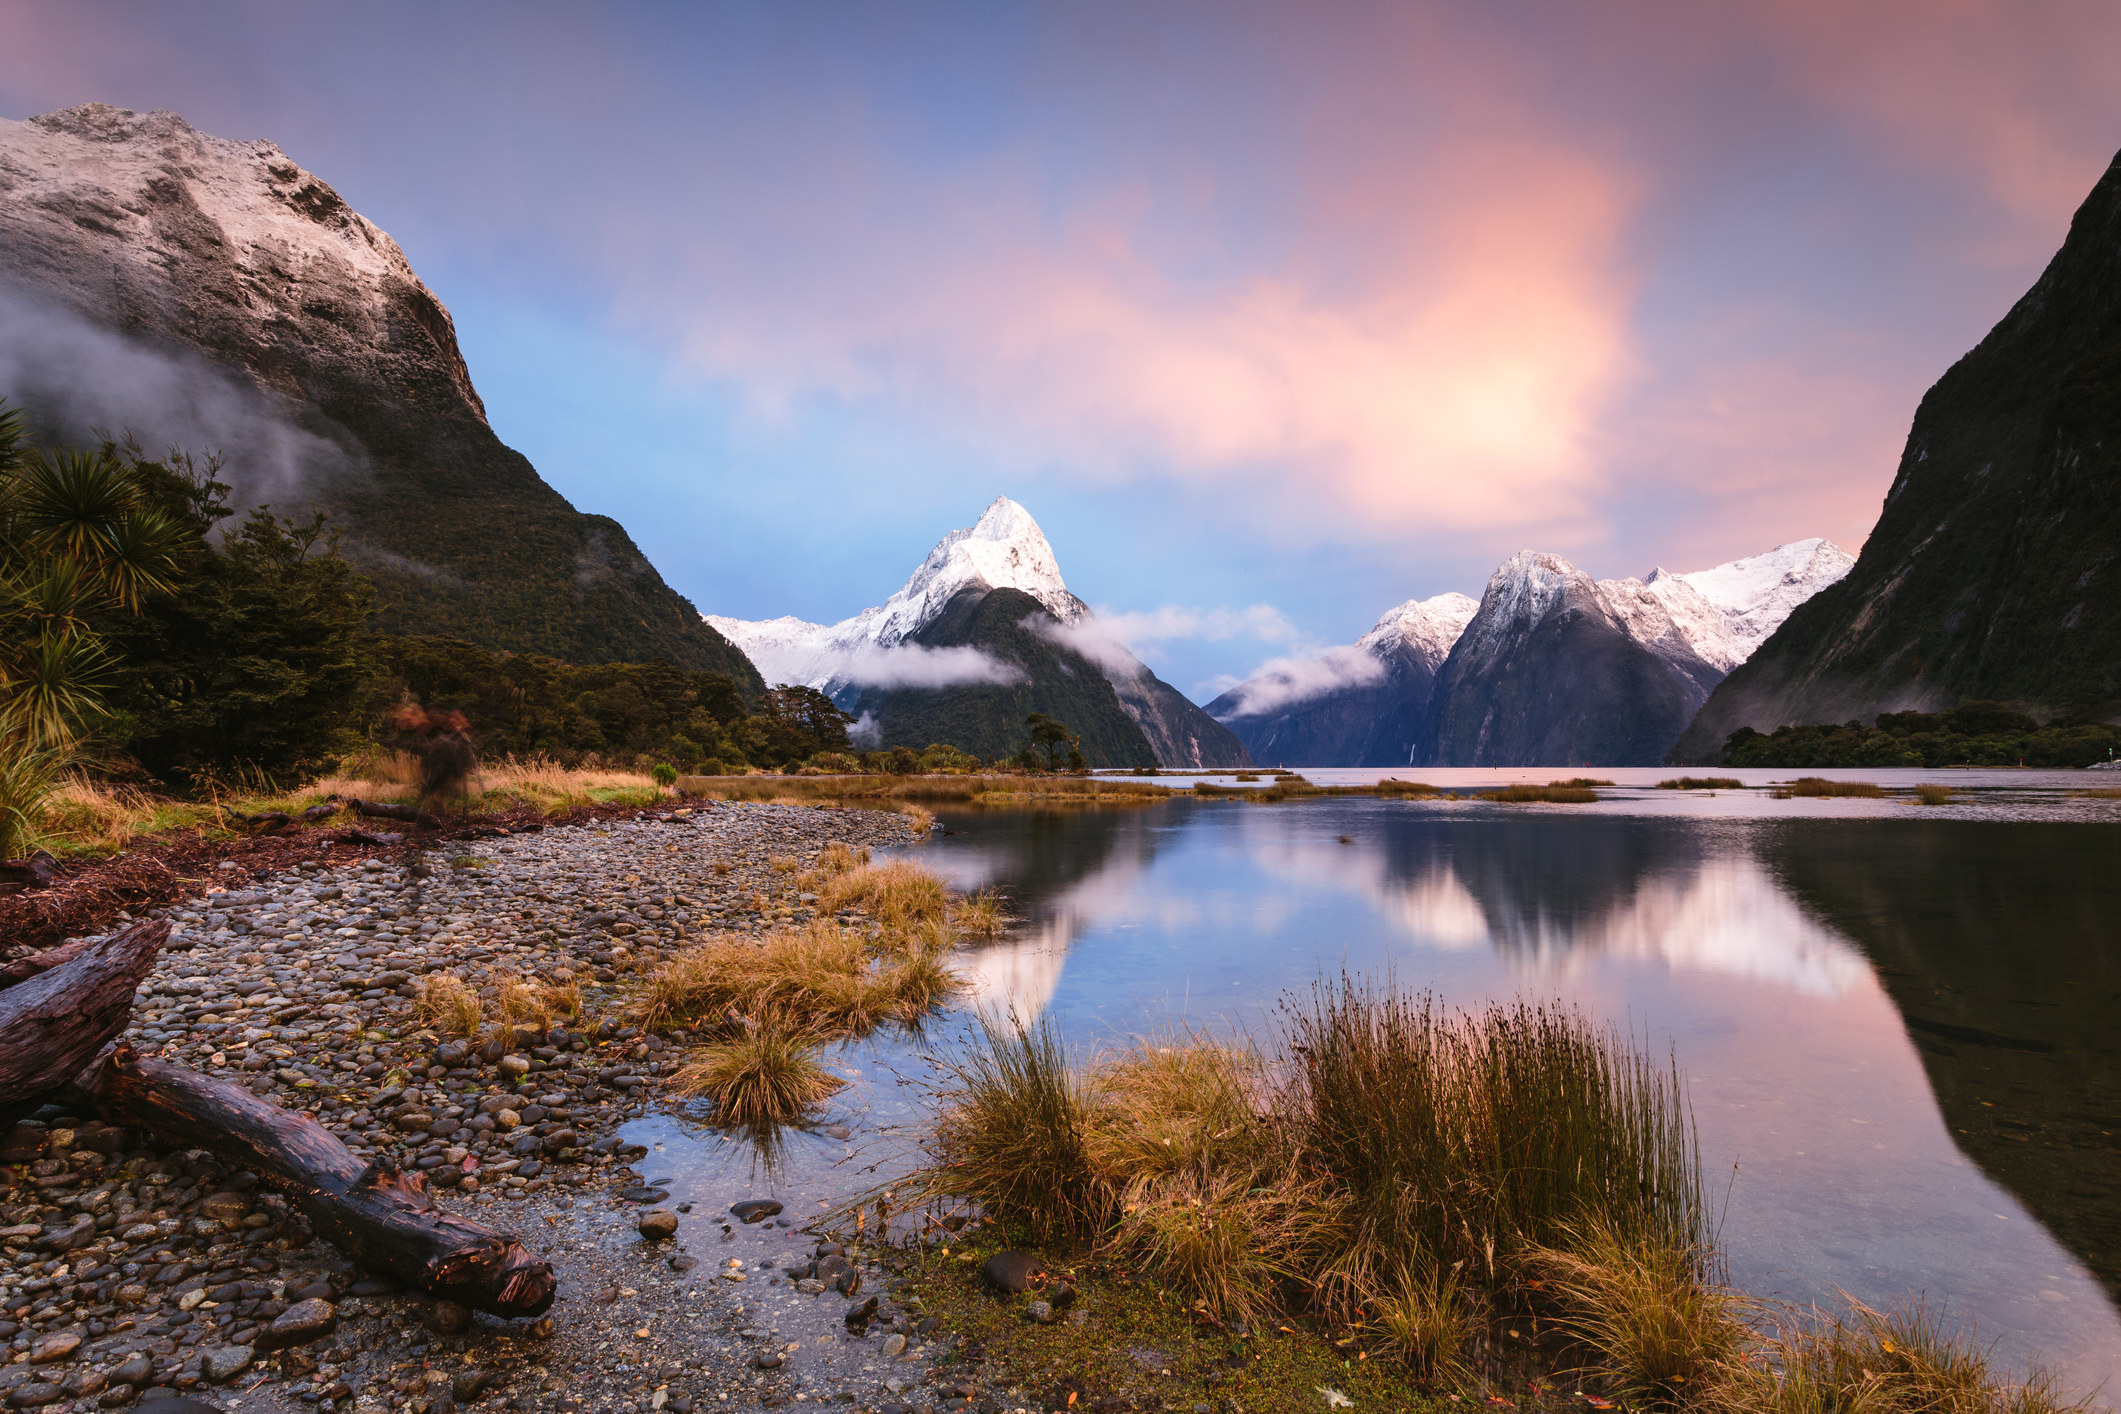 Dawn at Milford Sound in Fiordland National Park.